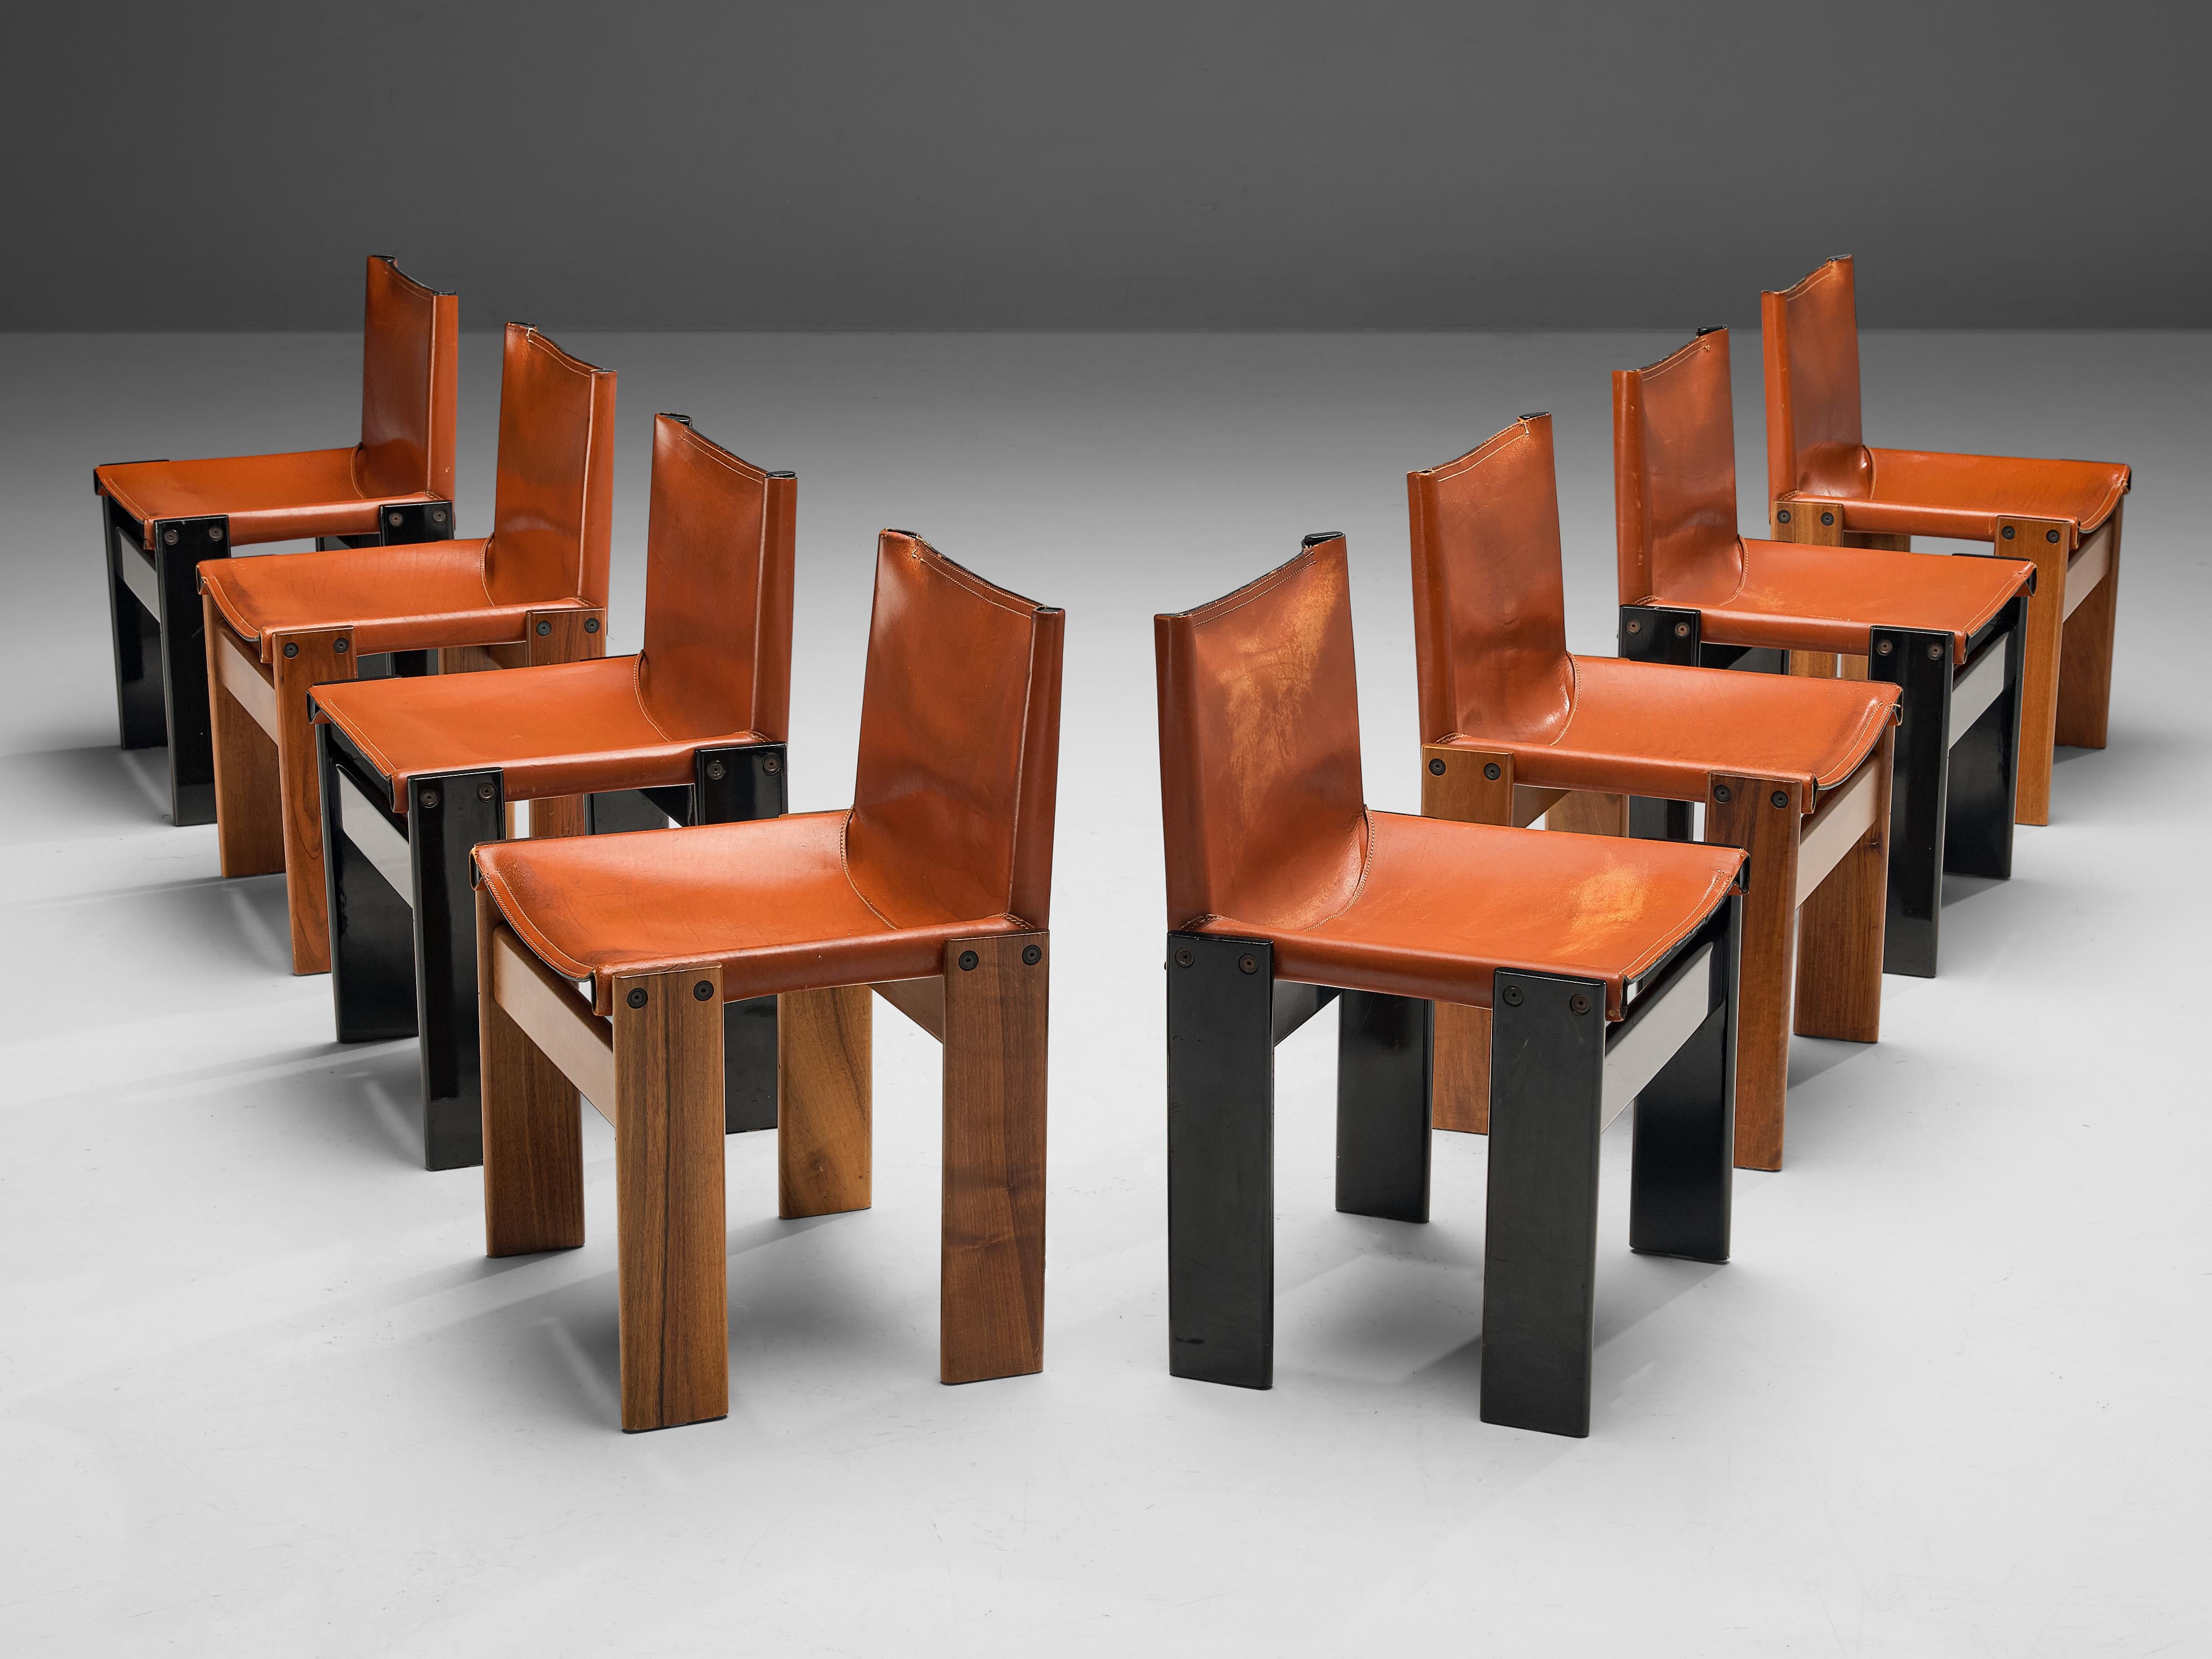 Afra & Tobia Scarpa, set of eight 'Monk' dining chairs, patinated walnut, black lacquered wood and cognac leather, Italy, 1974.

Set of eight 'Monk' chairs with a striking combination of walnut and black lacquered wooden frames. The wonderfully